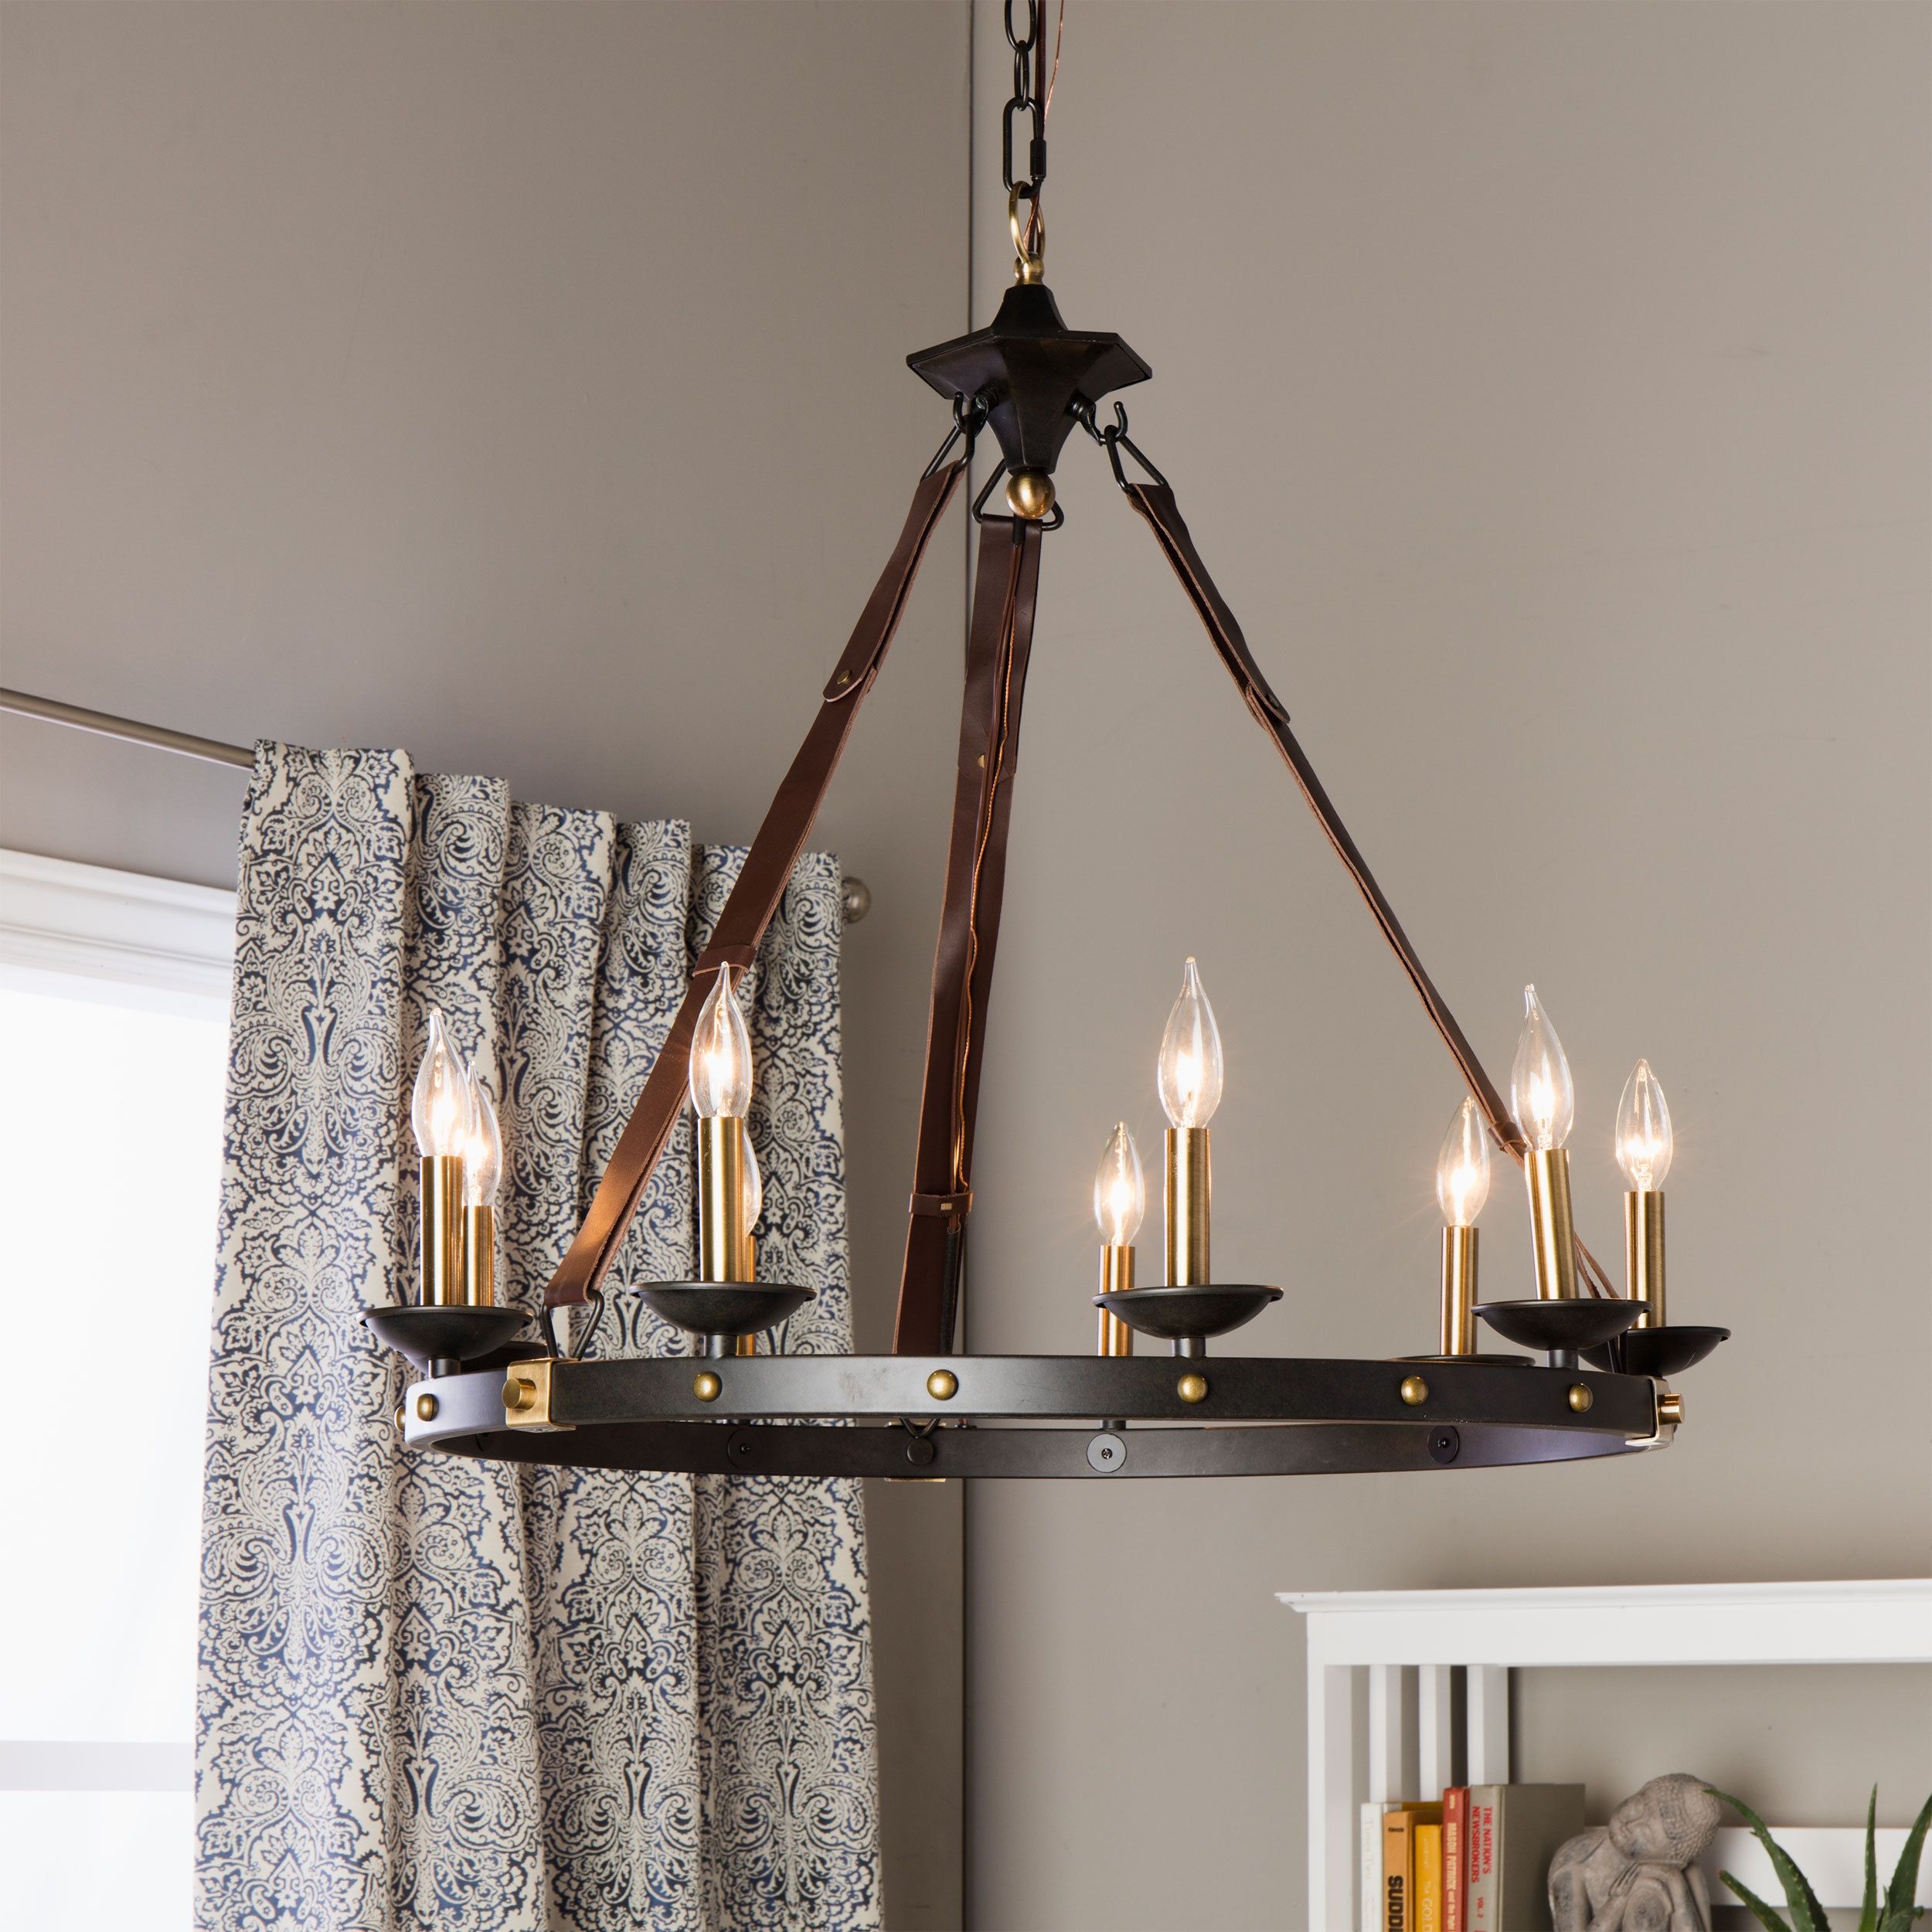 Cavalier 9 Light Black Chandelier Black Metal And Chandeliers With Regard To Large Black Chandelier (View 7 of 12)